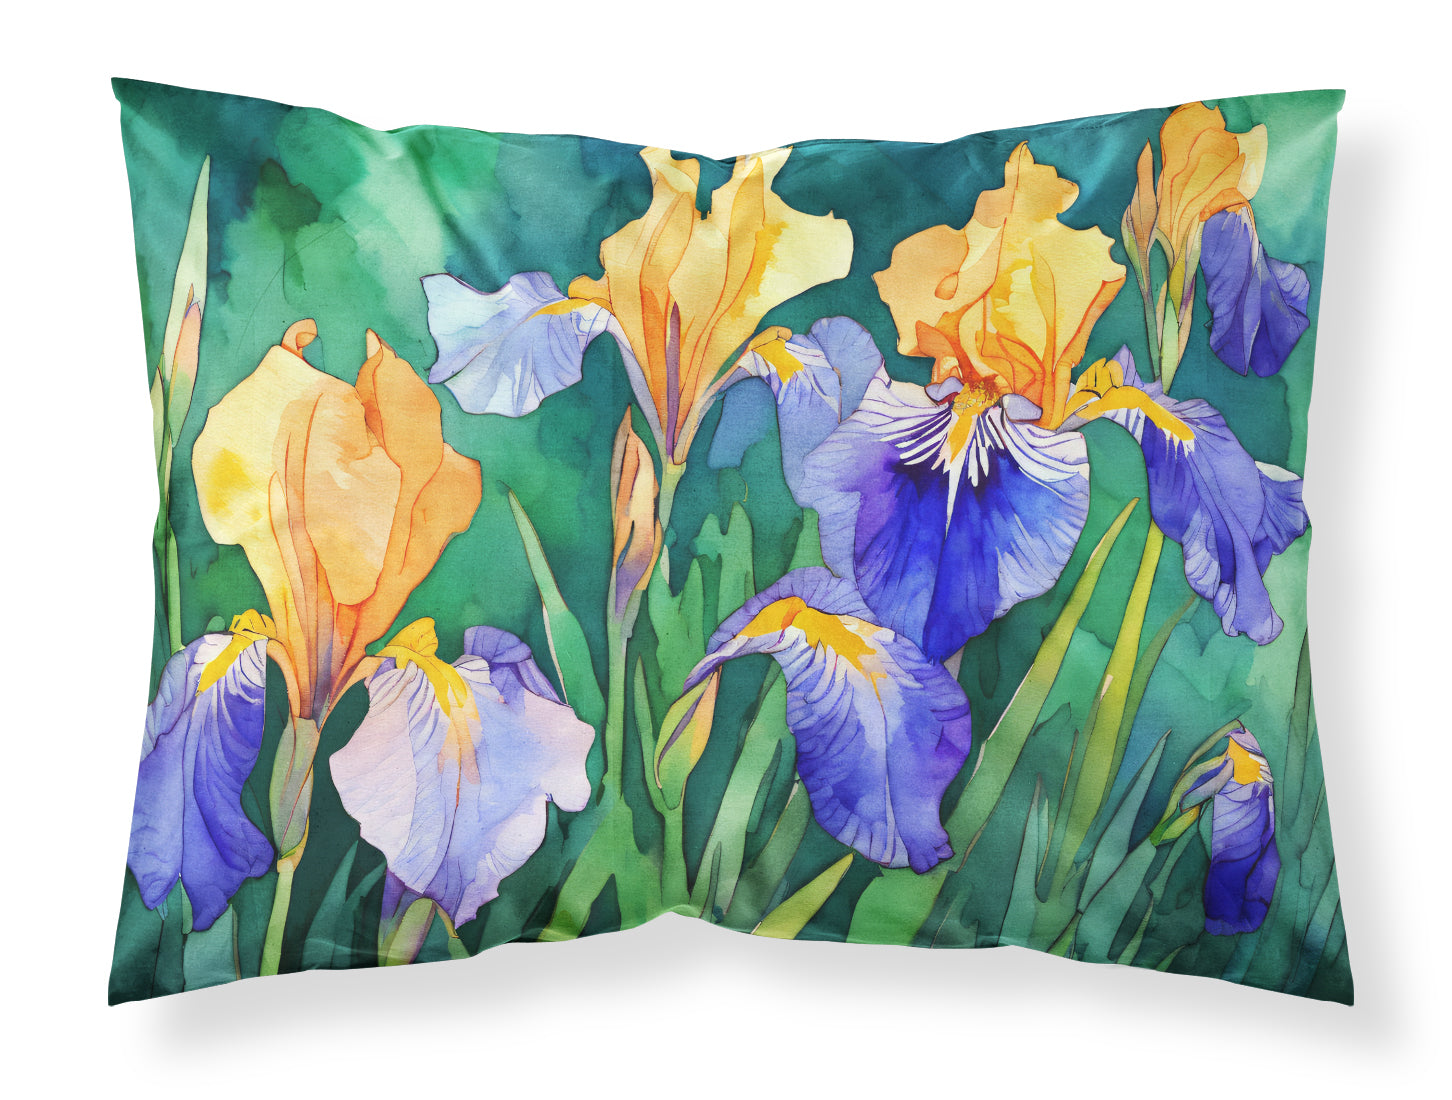 Buy this Tennessee Iris in Watercolor Fabric Standard Pillowcase